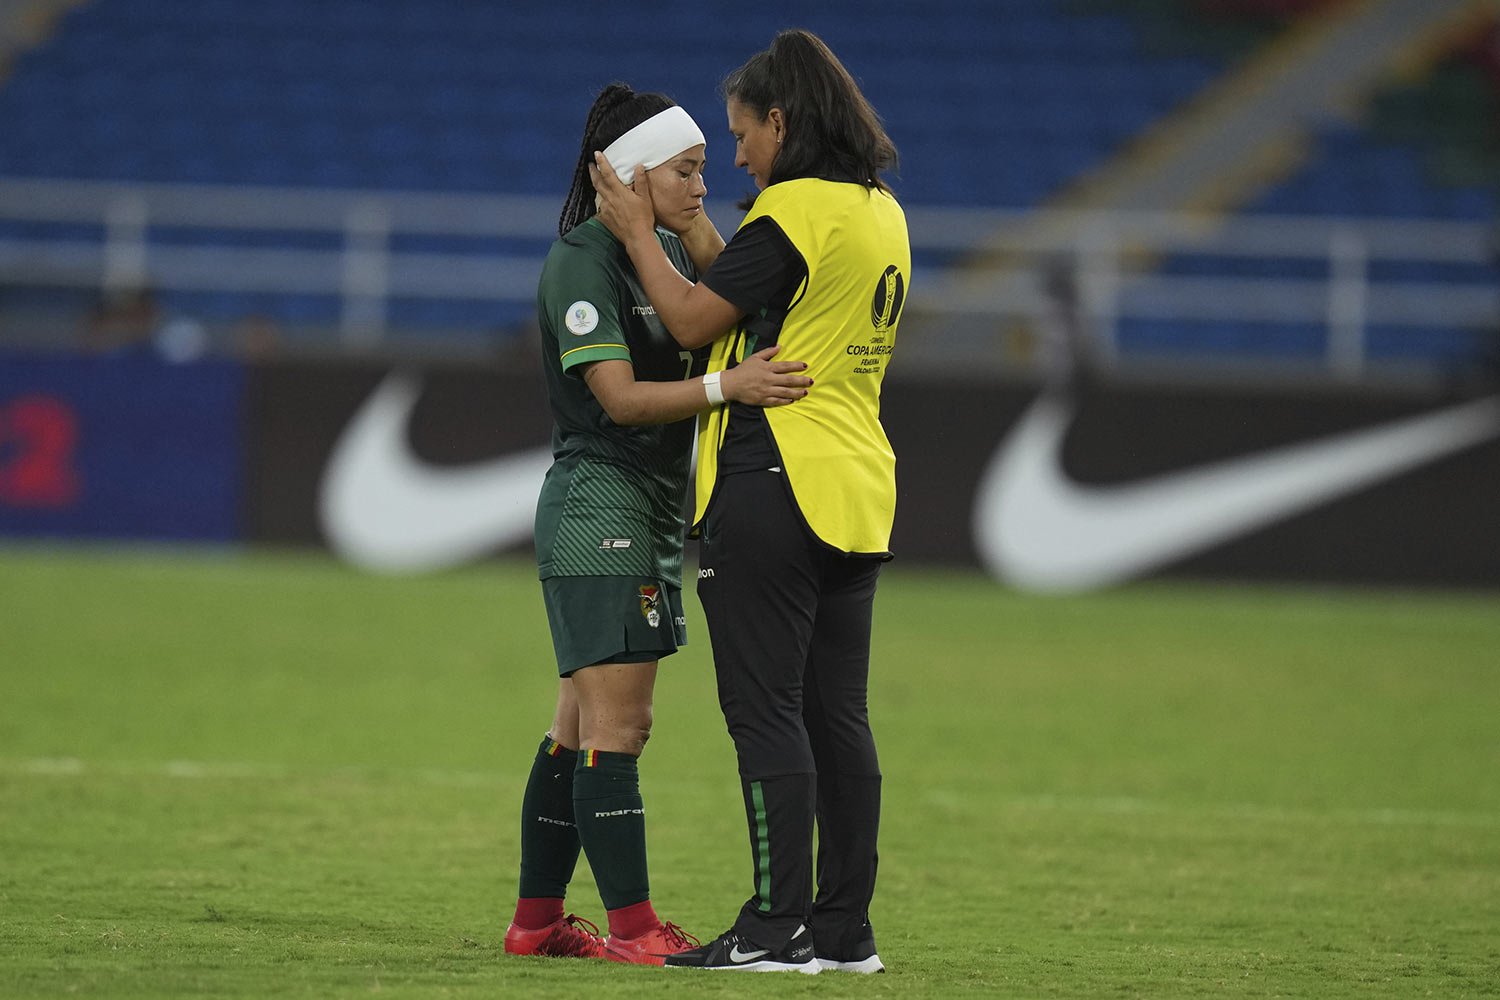  Bolivia's coach Rosana Gomez comforts her player Ana Rojas after they were defeated 5-0 by Chile during a Women's Copa America soccer match in Cali, Colombia, Sunday, July 17, 2022. (AP Photo/Dolores Ochoa) 